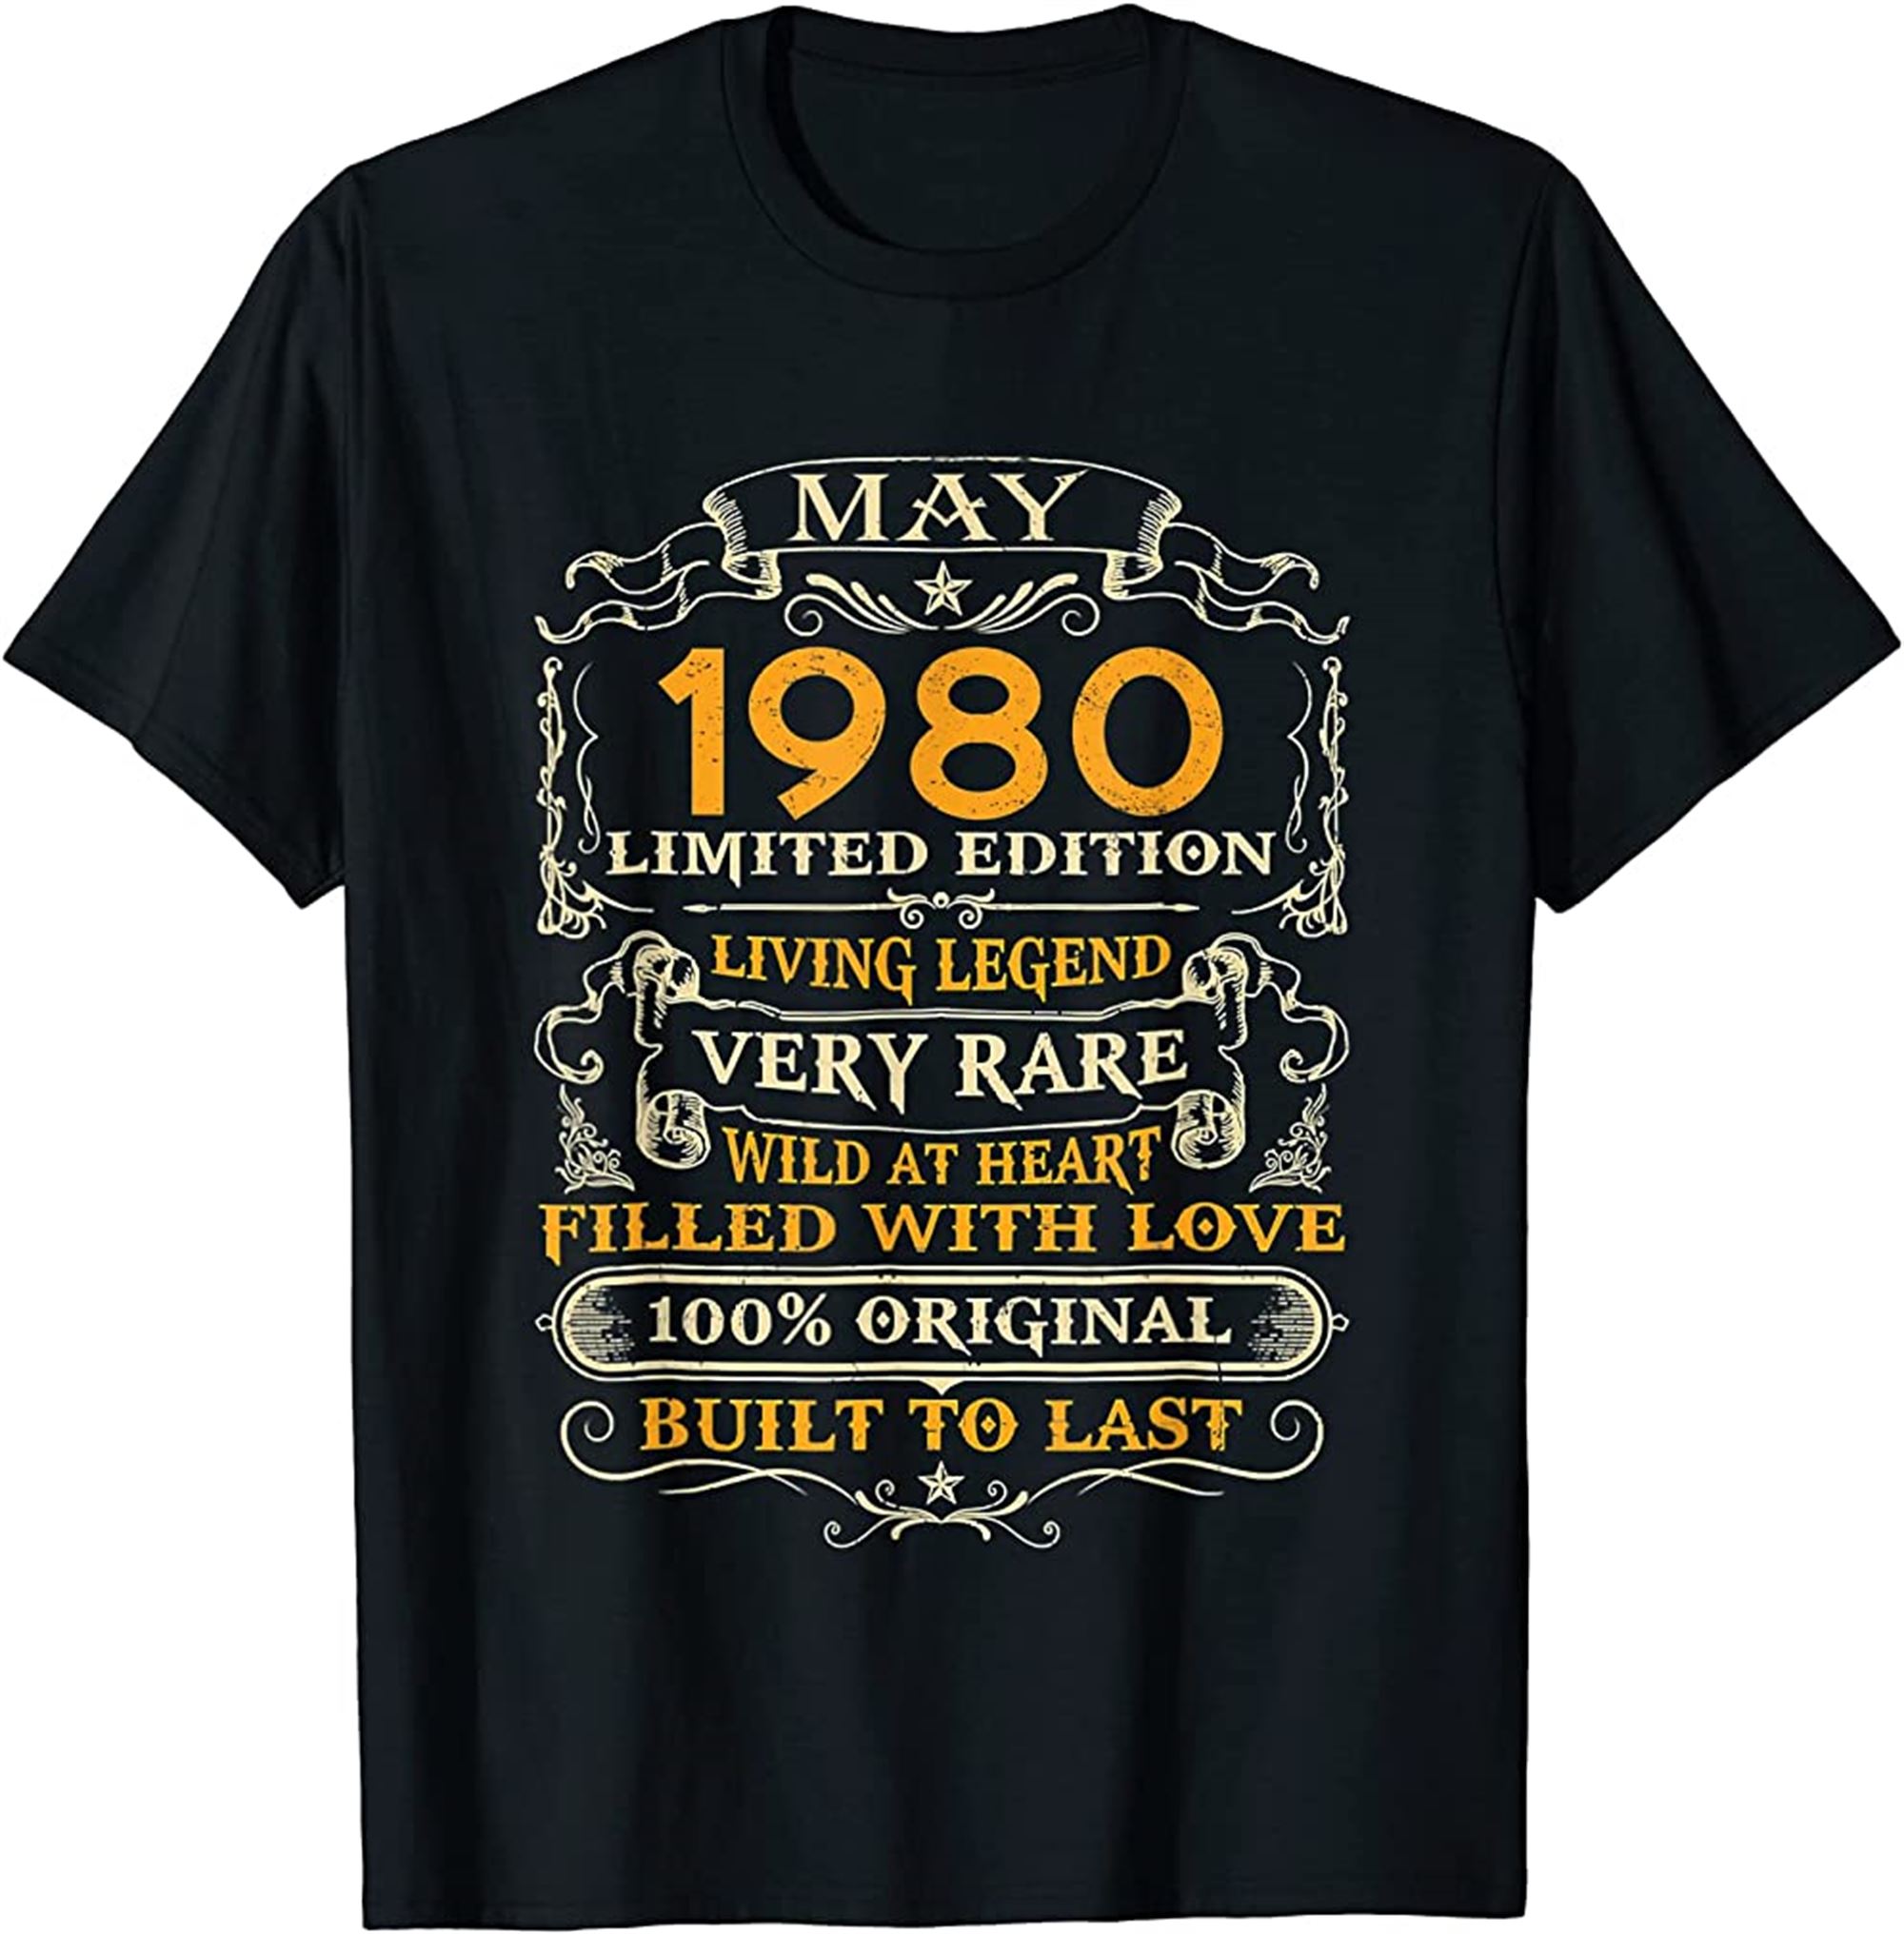 42nd Birthday Gift 42 Years Old Retro Vintage May 1980 T-shirt Full Size Up To 5xl